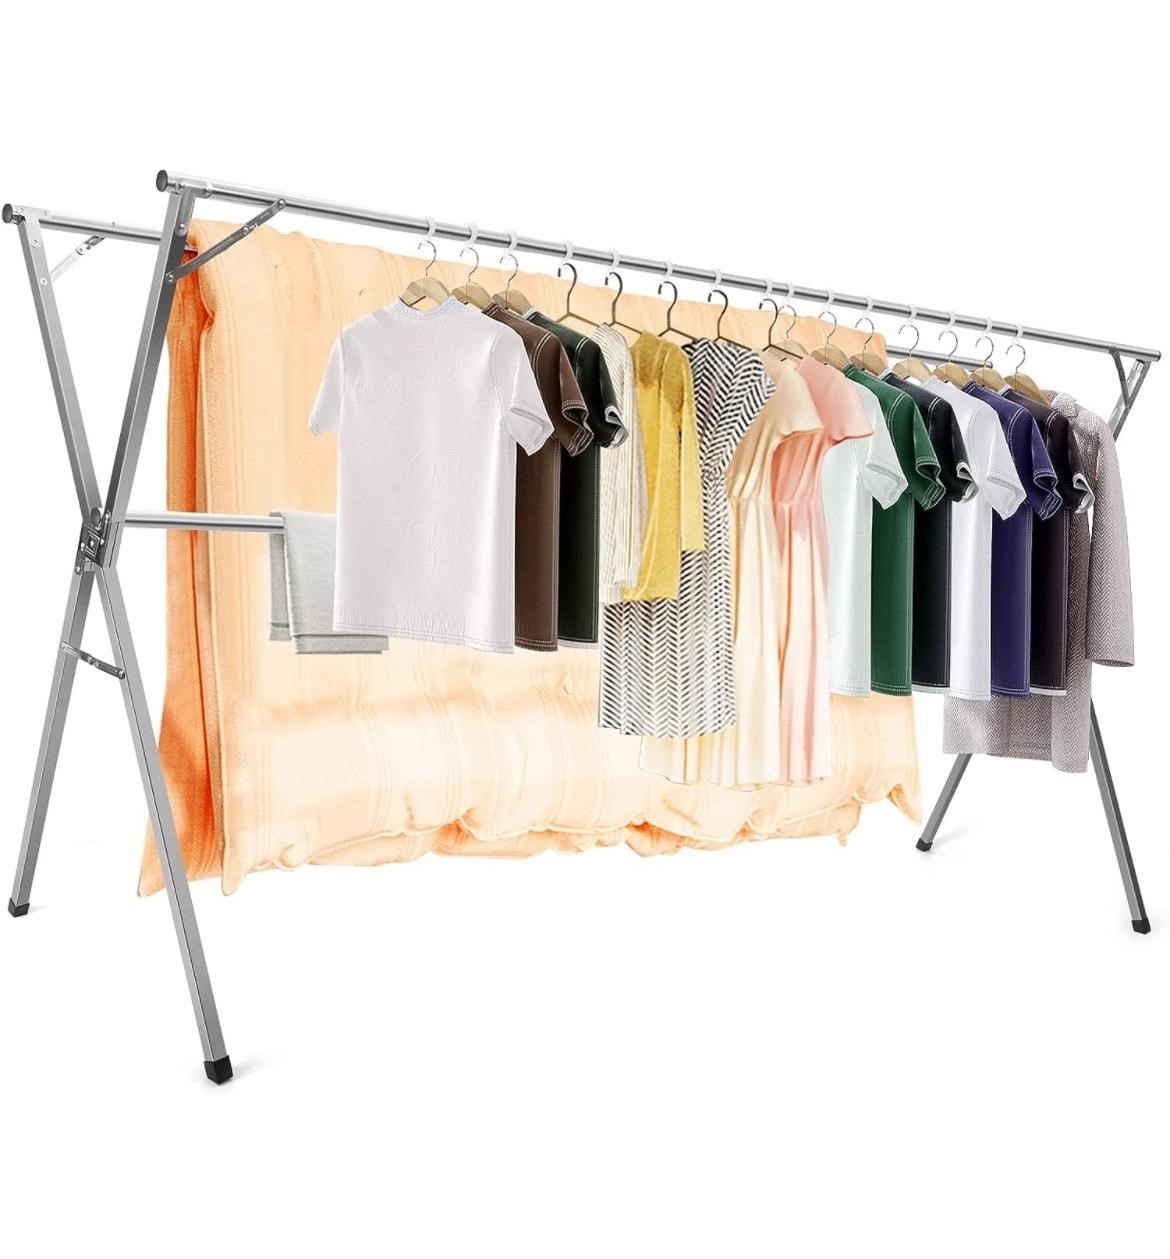 Clothes Drying Rack for Laundry Foldable